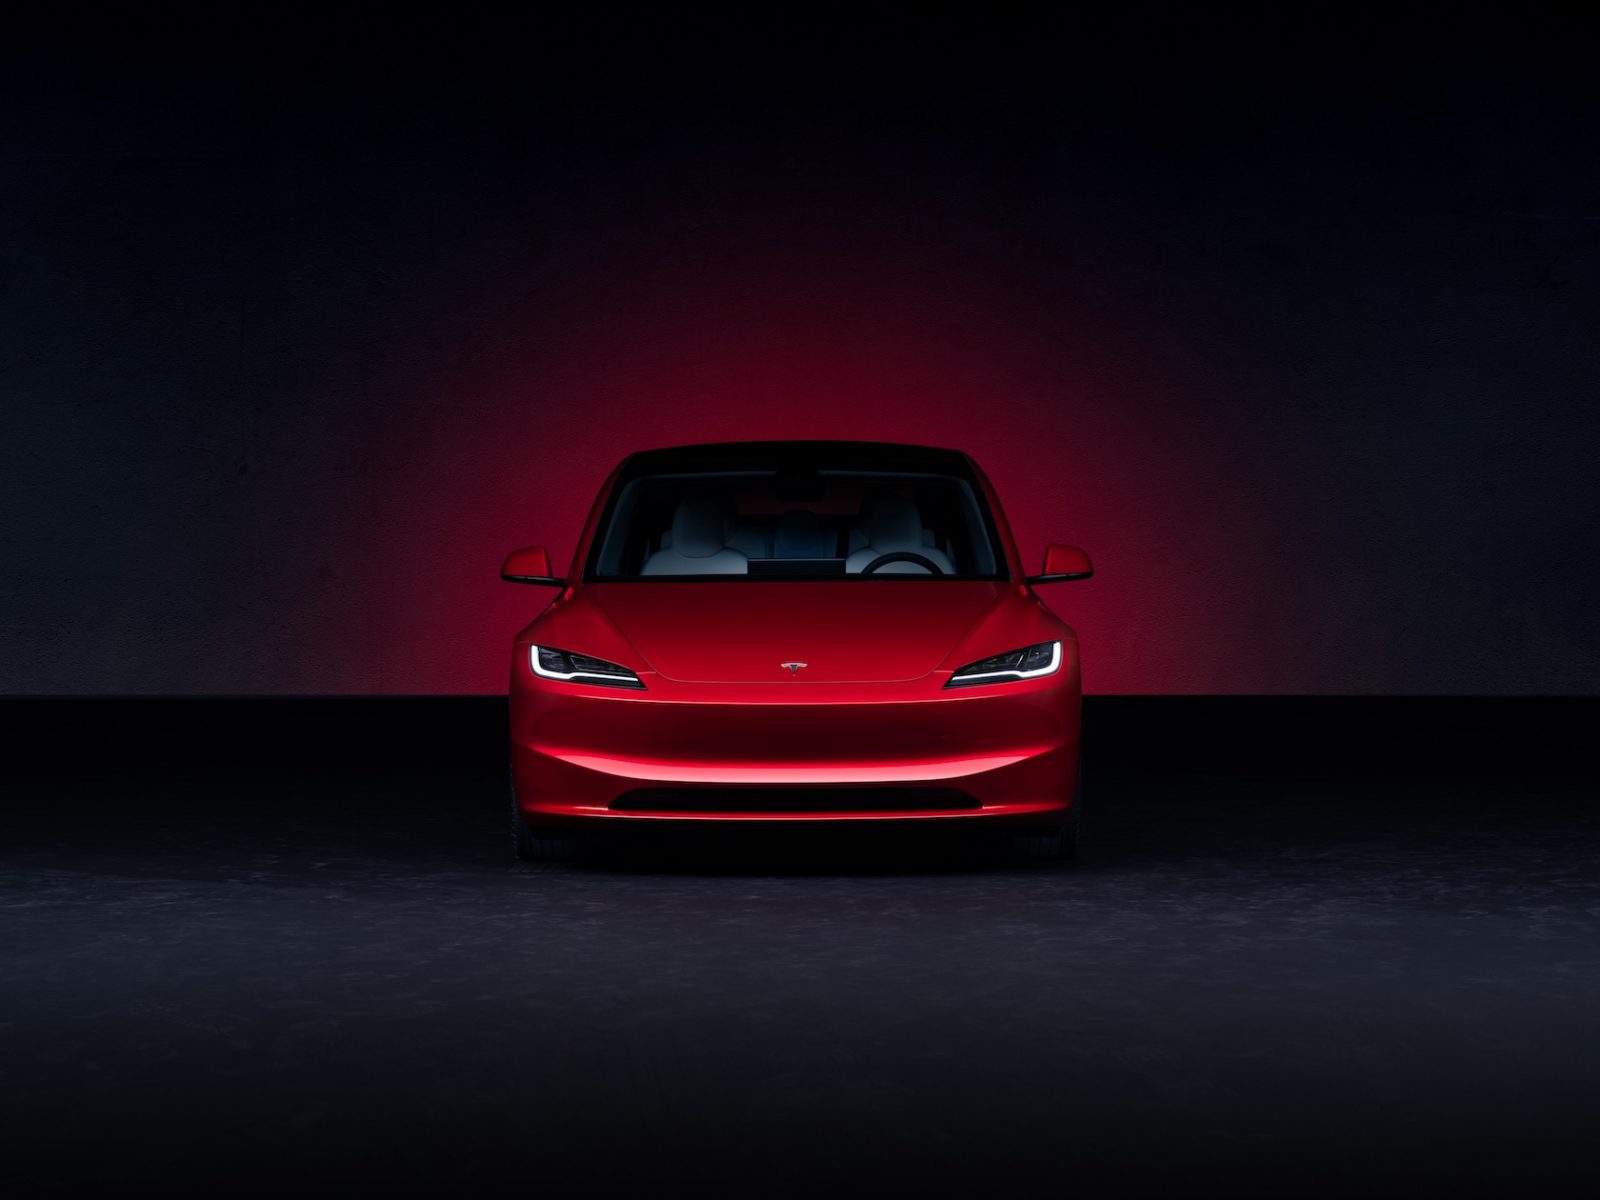 All About the New Tesla Model 3 Highland - When Will the U.S. Get